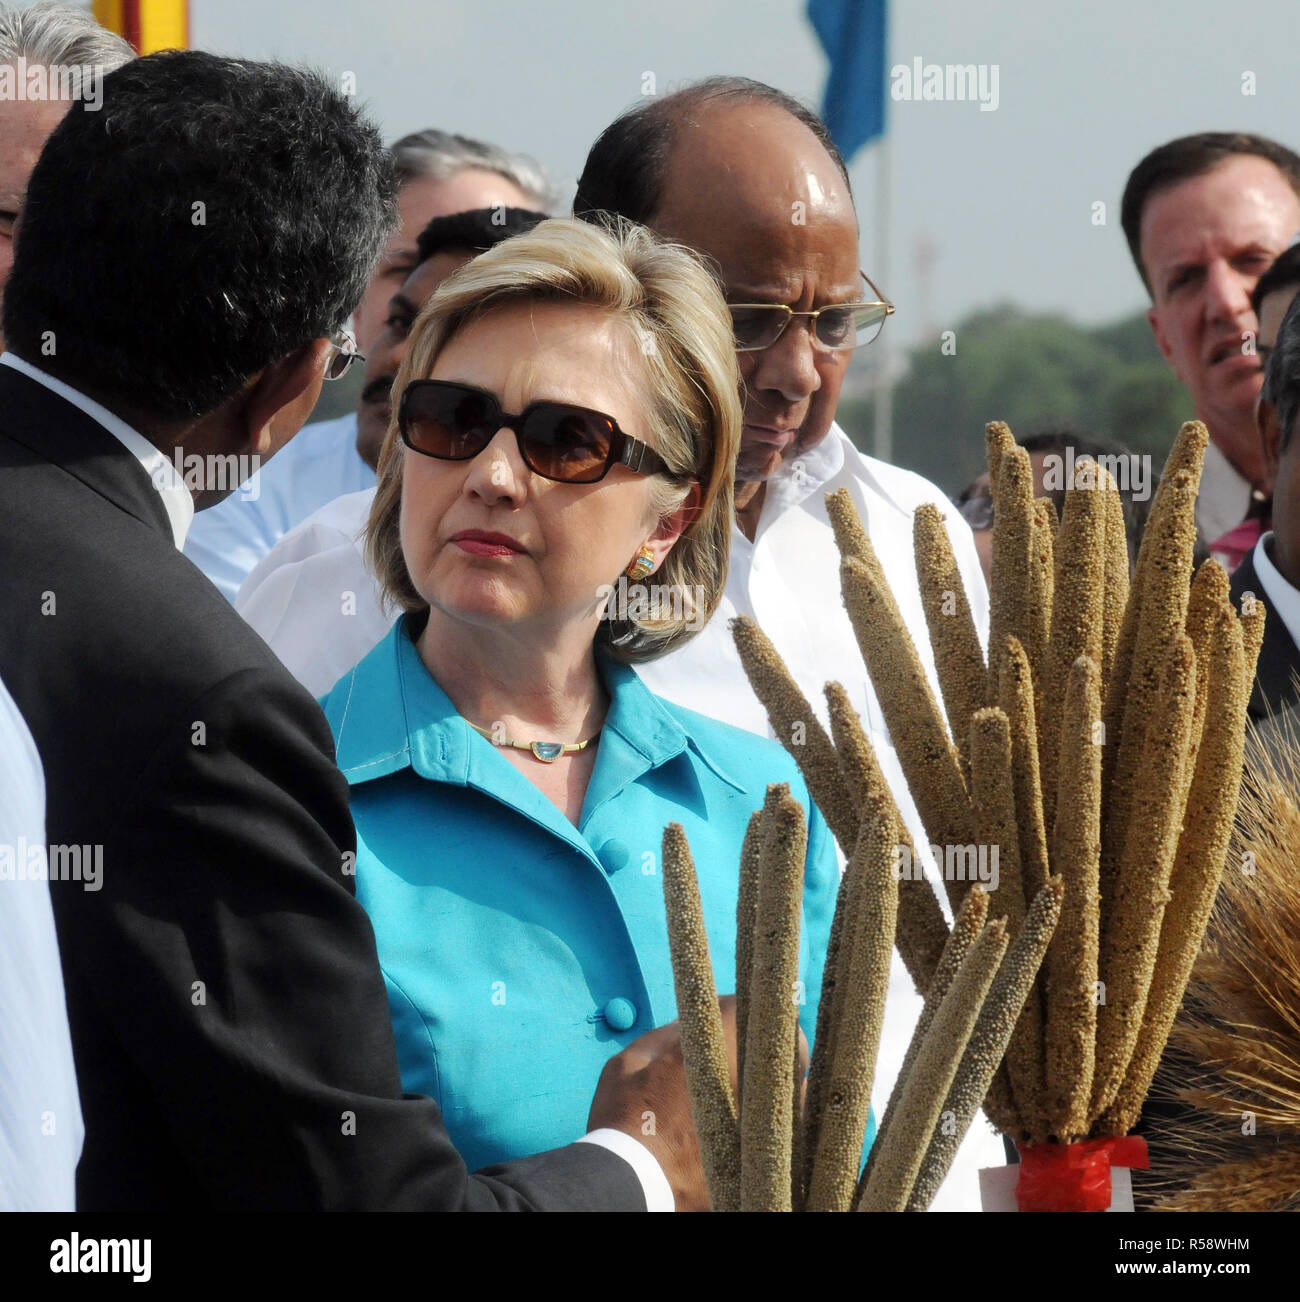 2009 - U.S. Secretary of State Hillary Rodham Clinton, Sharad Pawar, Minister of Agriculture, Consumer Affairs, Food and Public Distribution, and Dr. Mangala Rai, President of the National Academy of Agricultural Sciences, examine wheat samples Stock Photo